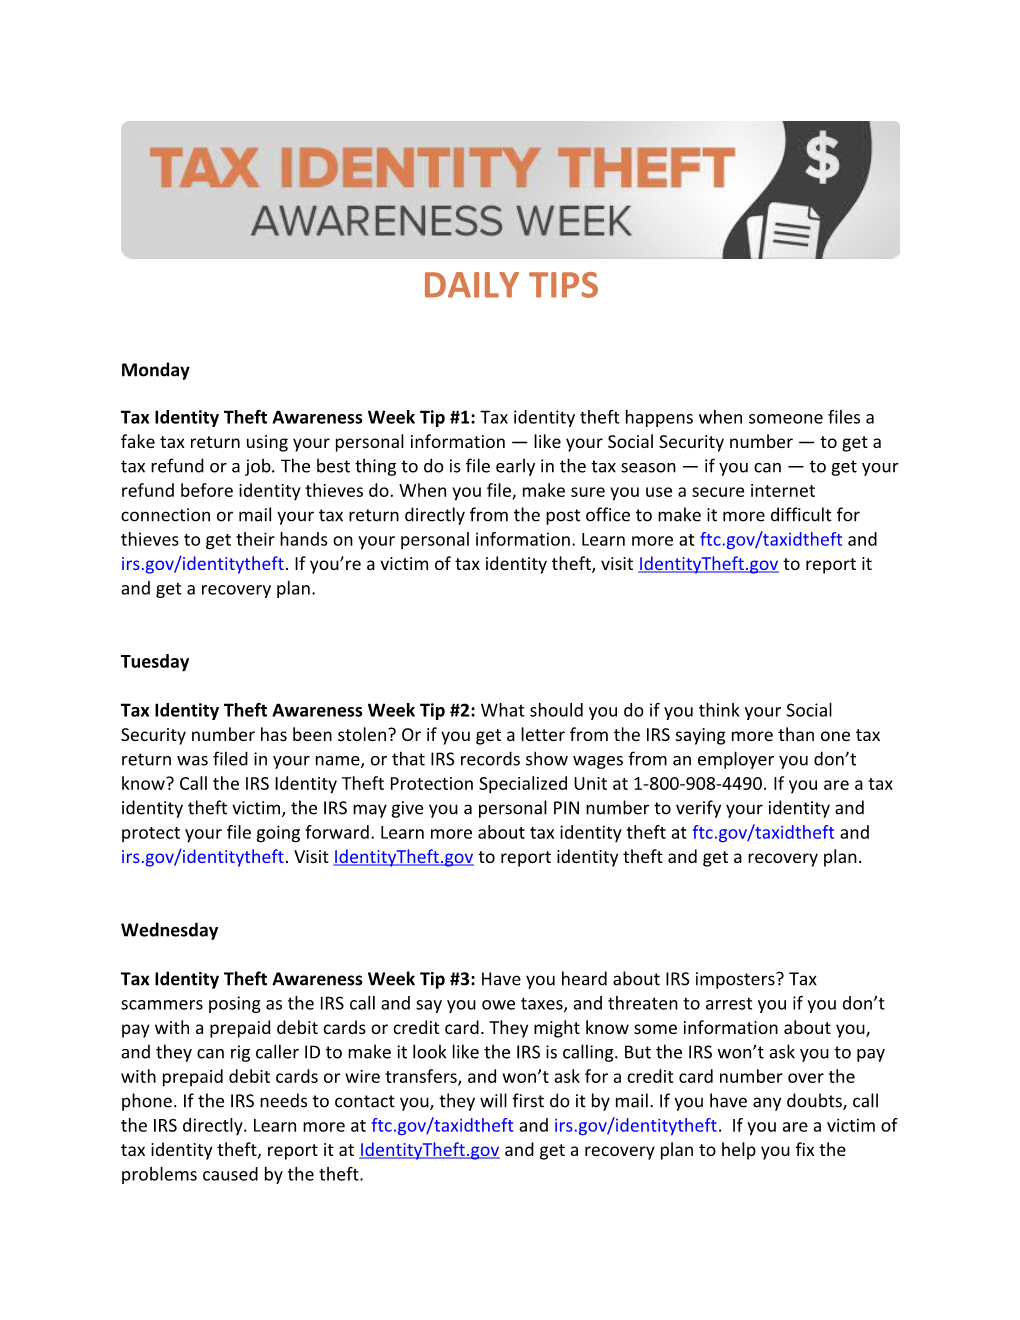 Tax Identity Theft Awareness Week Tip #1: Tax Identity Theft Happens When Someone Files